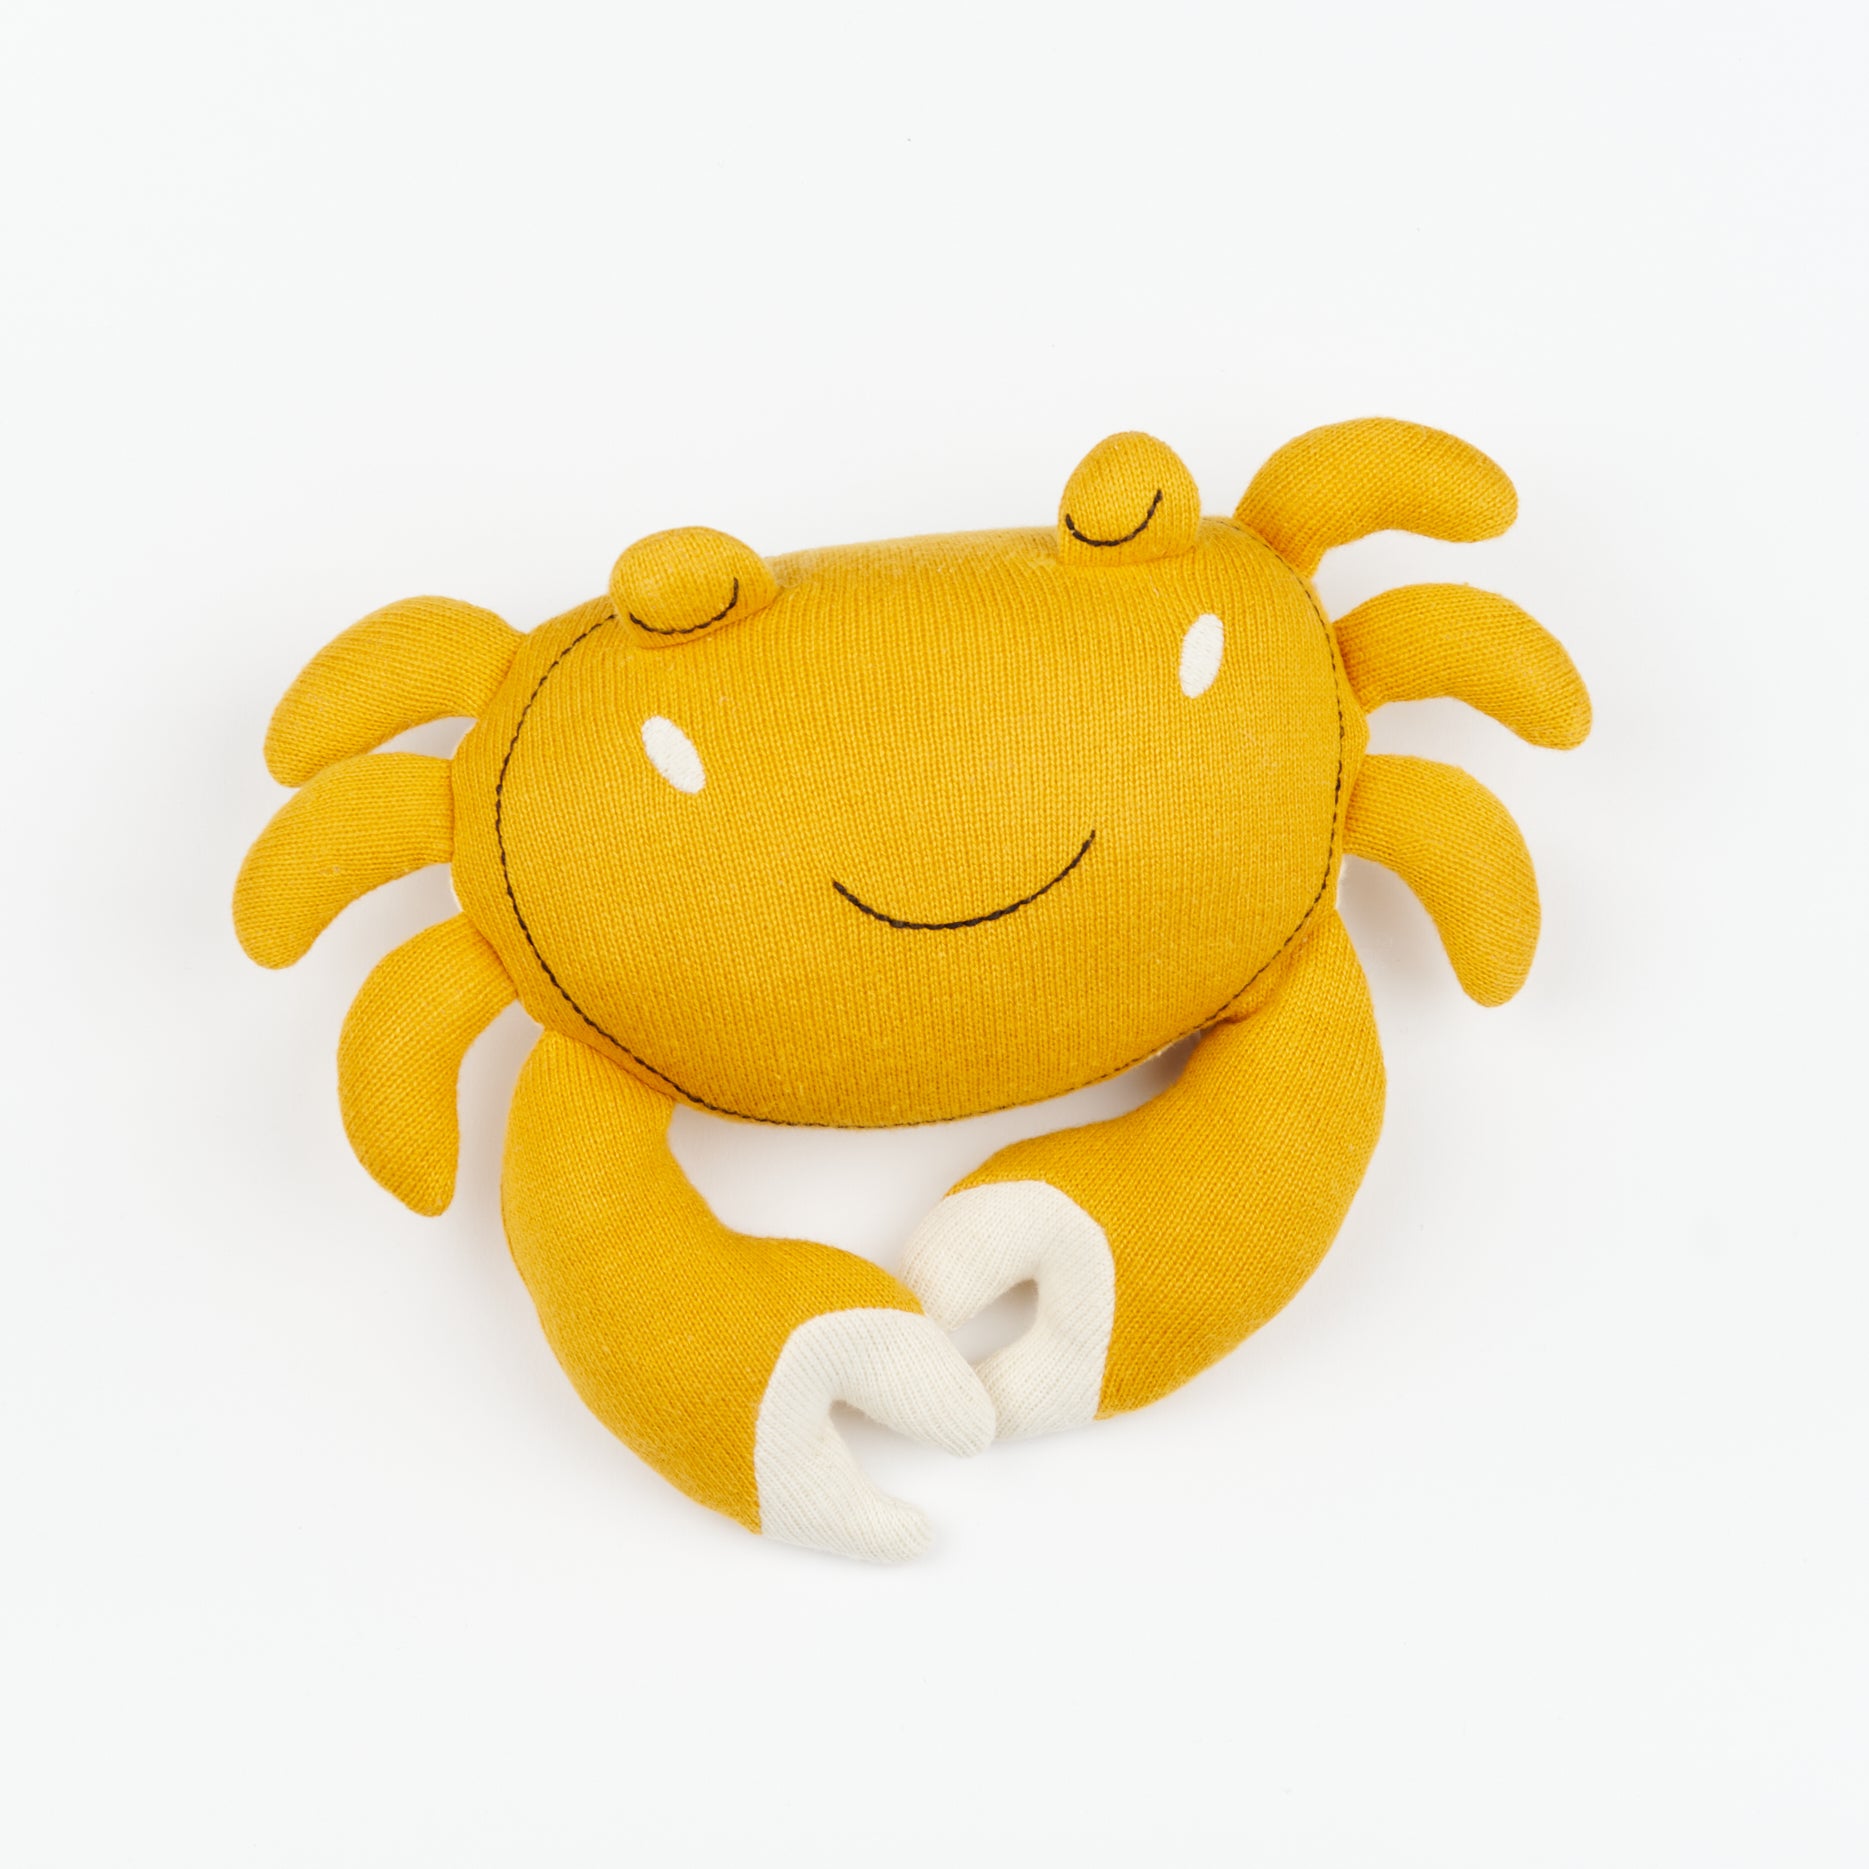 A plush soft toy yellow crab with white claws and smiling face